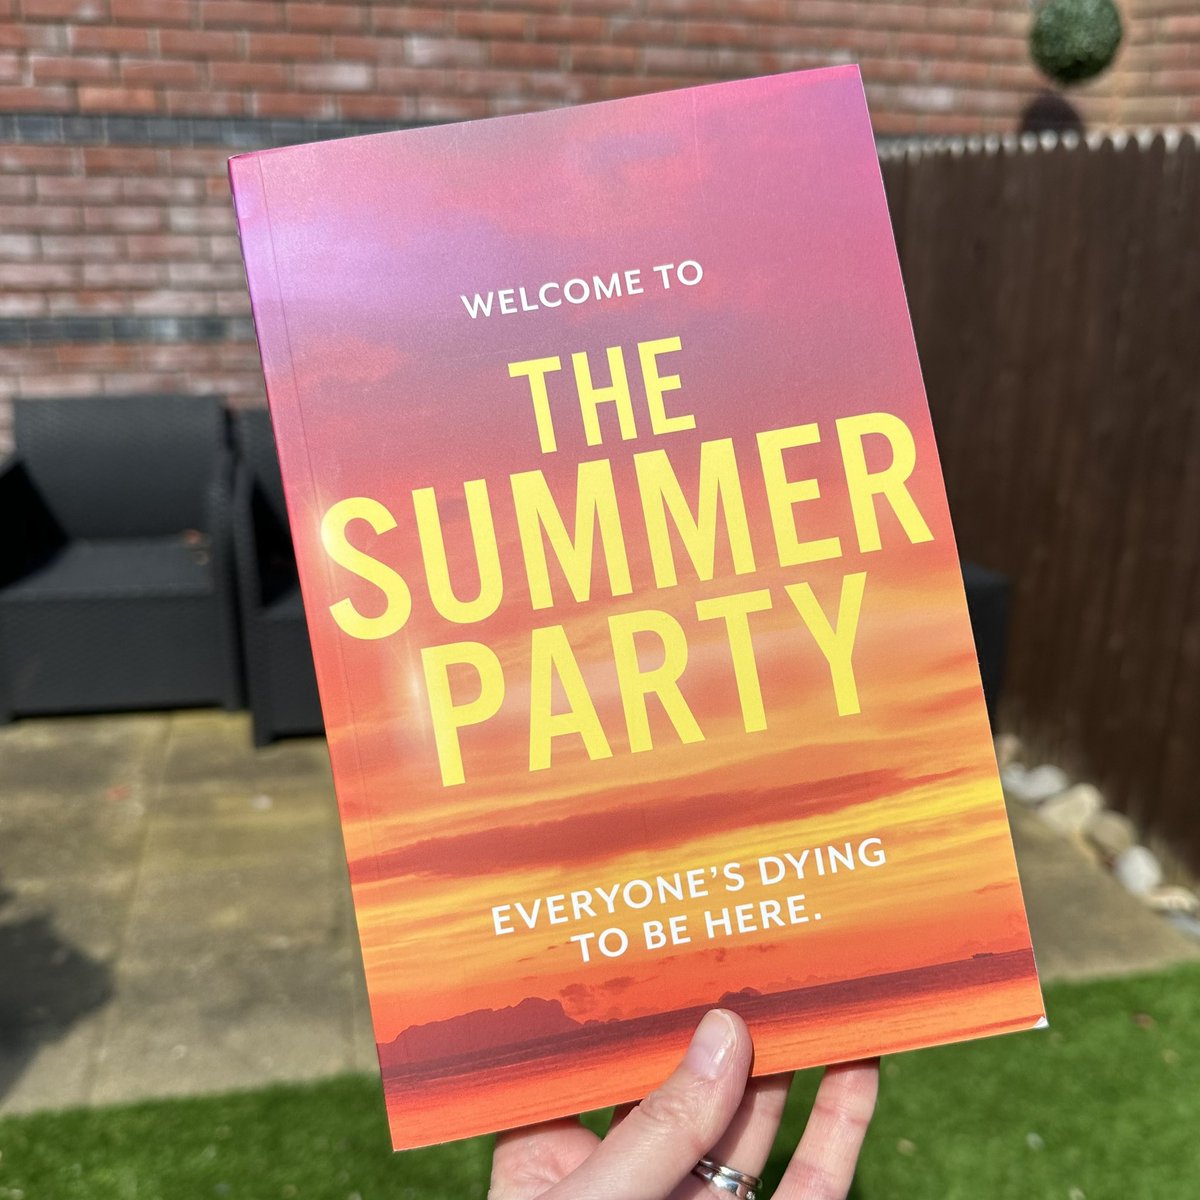 📚📮#BookPost 📚📮 After loving #TheHoneymoon I’m excited to be invited to #TheSummerParty by @KateGrayAuthor The company’s summer party is the event of the year, everyone is dying to be there…☀️ Thank you to @IsabelleHPG @headlinepg for sending #BookTwitter #bookblogger